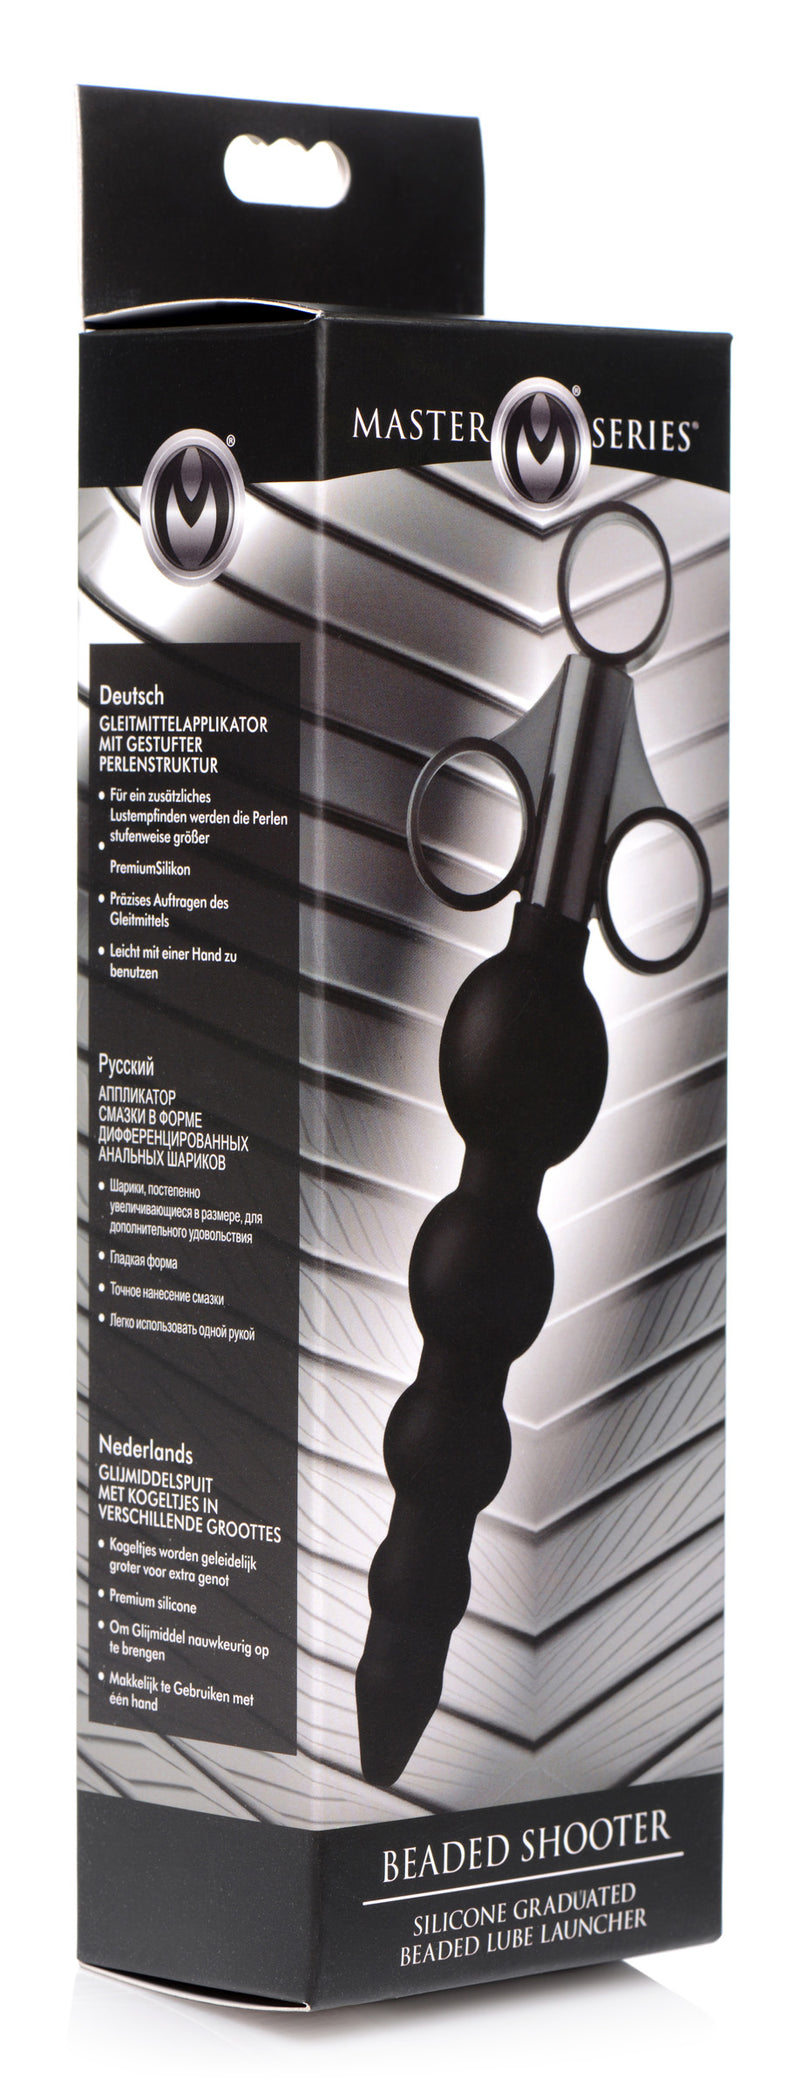 Silicone Graduated Beads Lubricant Launcher lube-applicator from Master Series